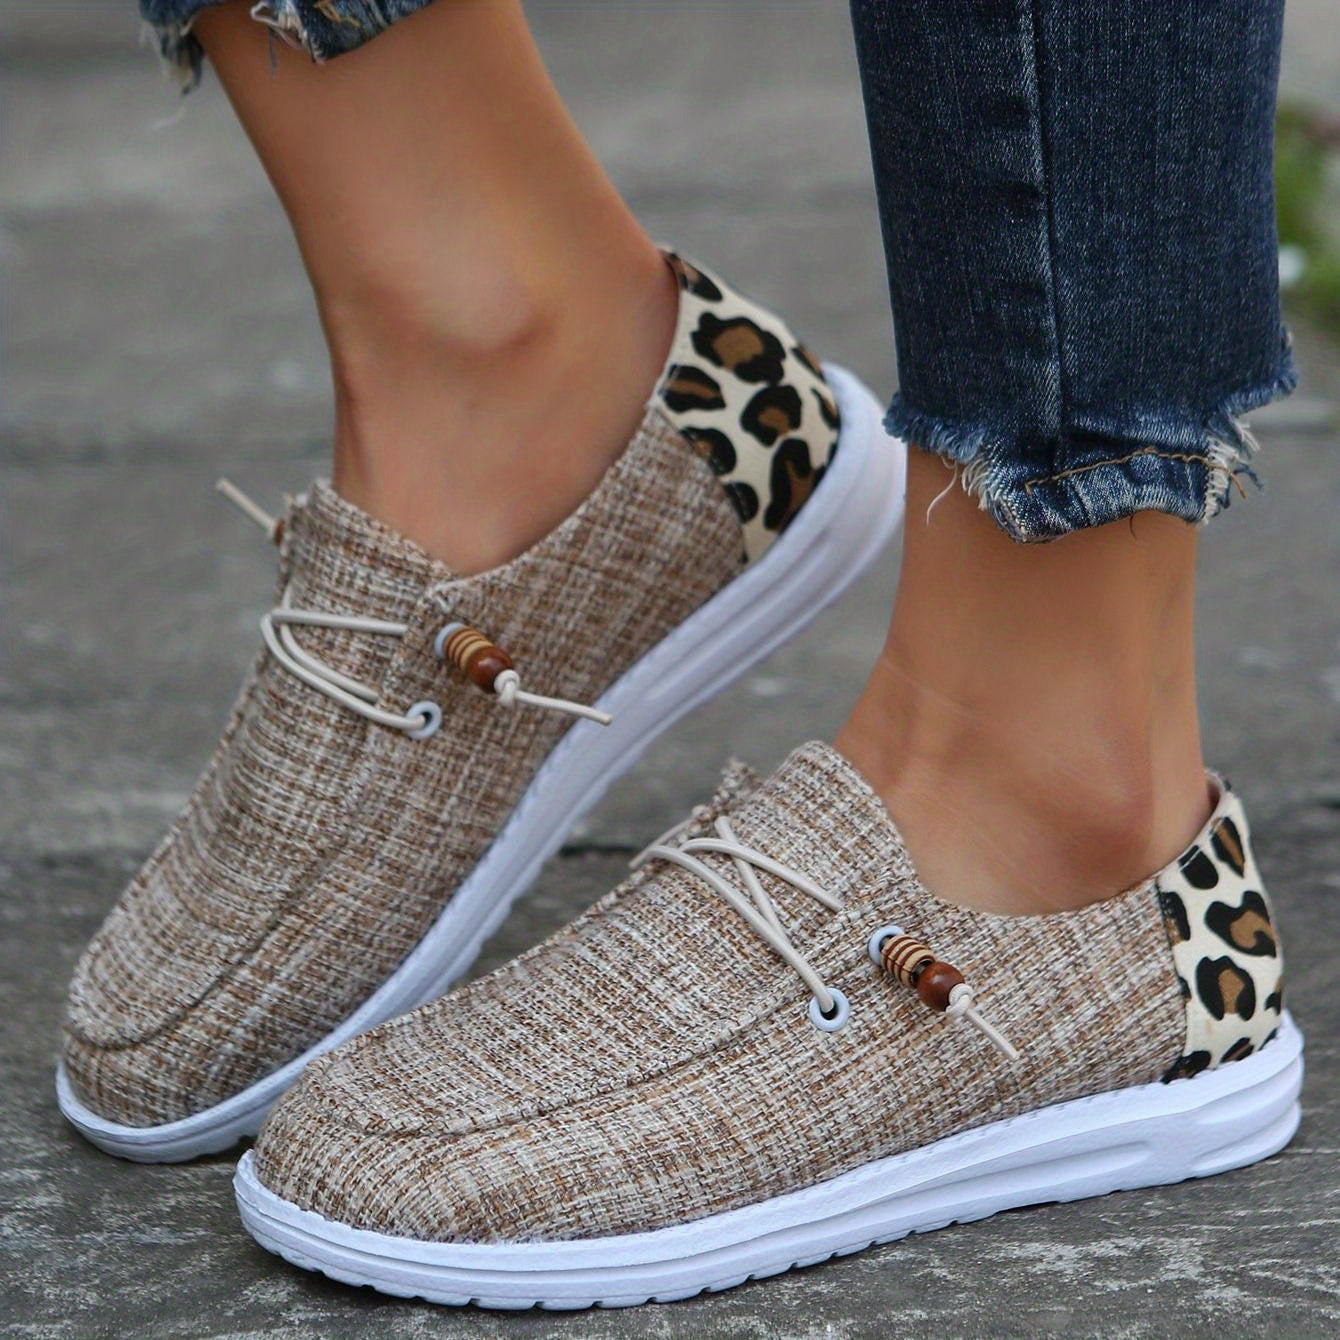 Women's Casual Flat Loafers, Round Toe Leopard Print Slip On Low Top Canvas Shoes, Comfy Flat Sneakers